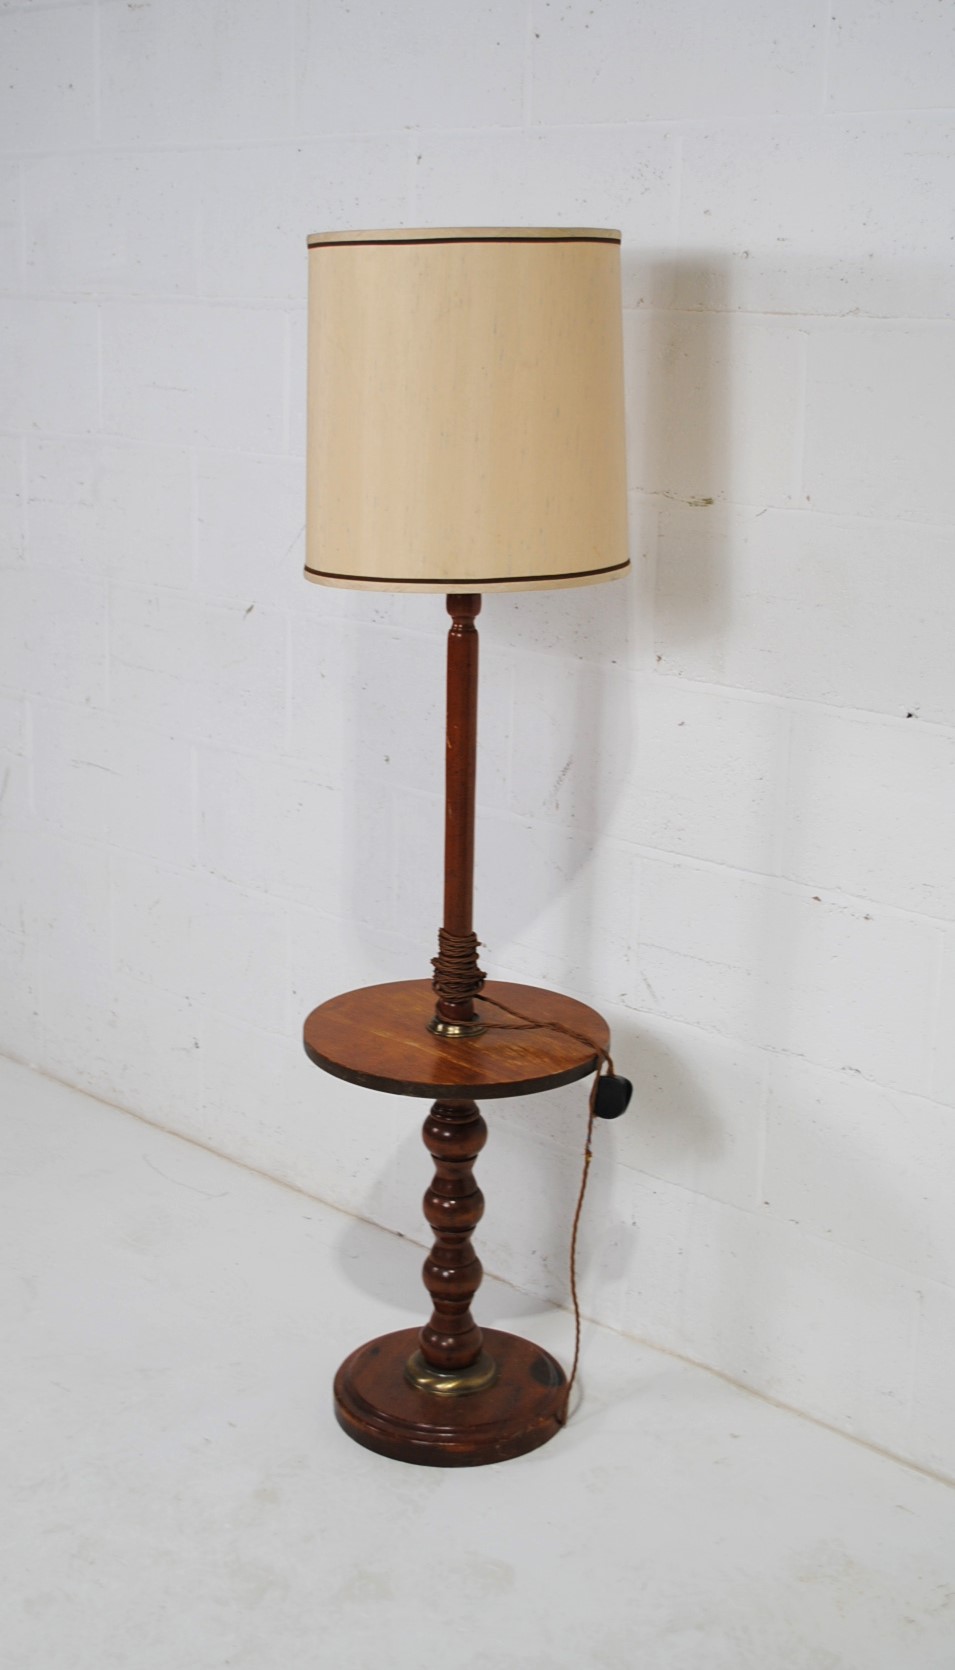 A wooden standard lamp with table base - Image 3 of 3